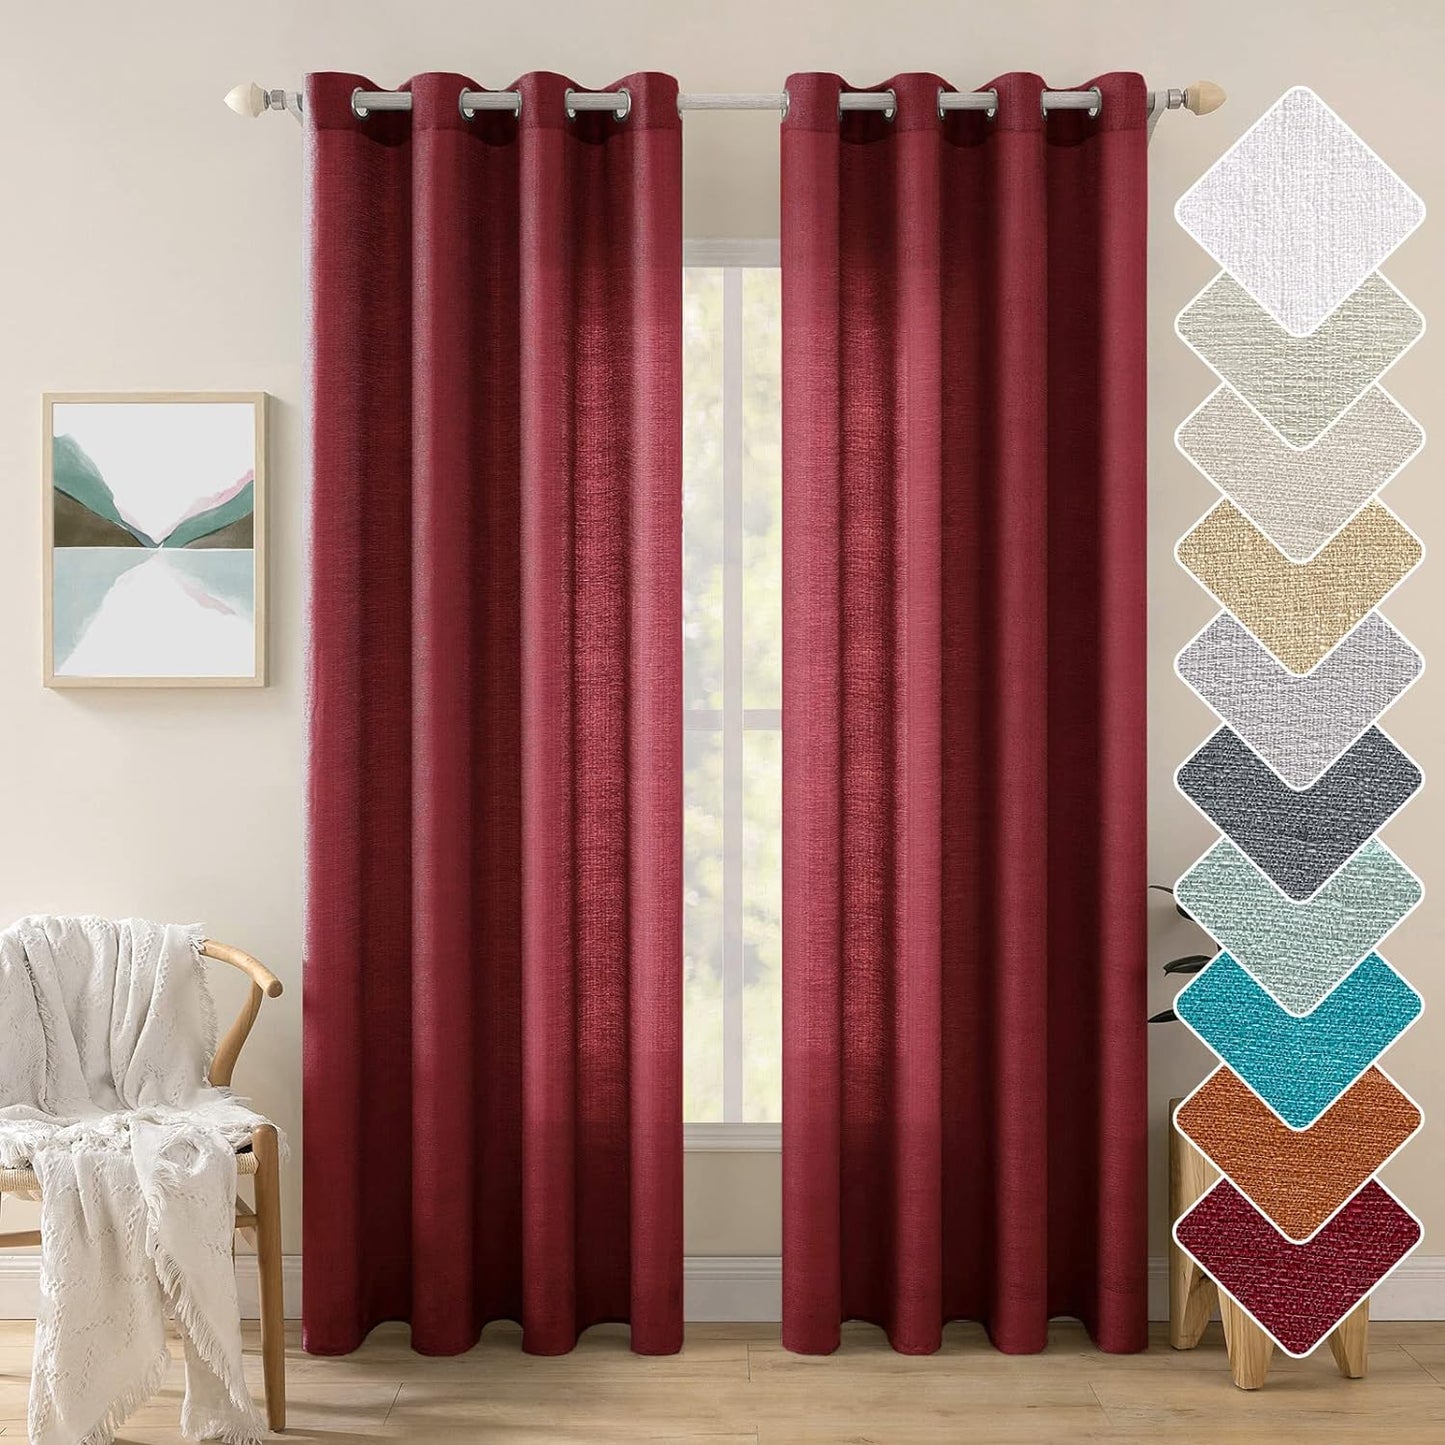 MIULEE Burnt Orange Linen Semi Sheer Curtains 2 Panels for Living Room Bedroom Linen Textured Light Filtering Privacy Window Curtains Terracotta Grommet Drapes Rust Boho Fall Decor W 52 X L 84 Inches  MIULEE Grommet | Burgundy Red W52 X L84 